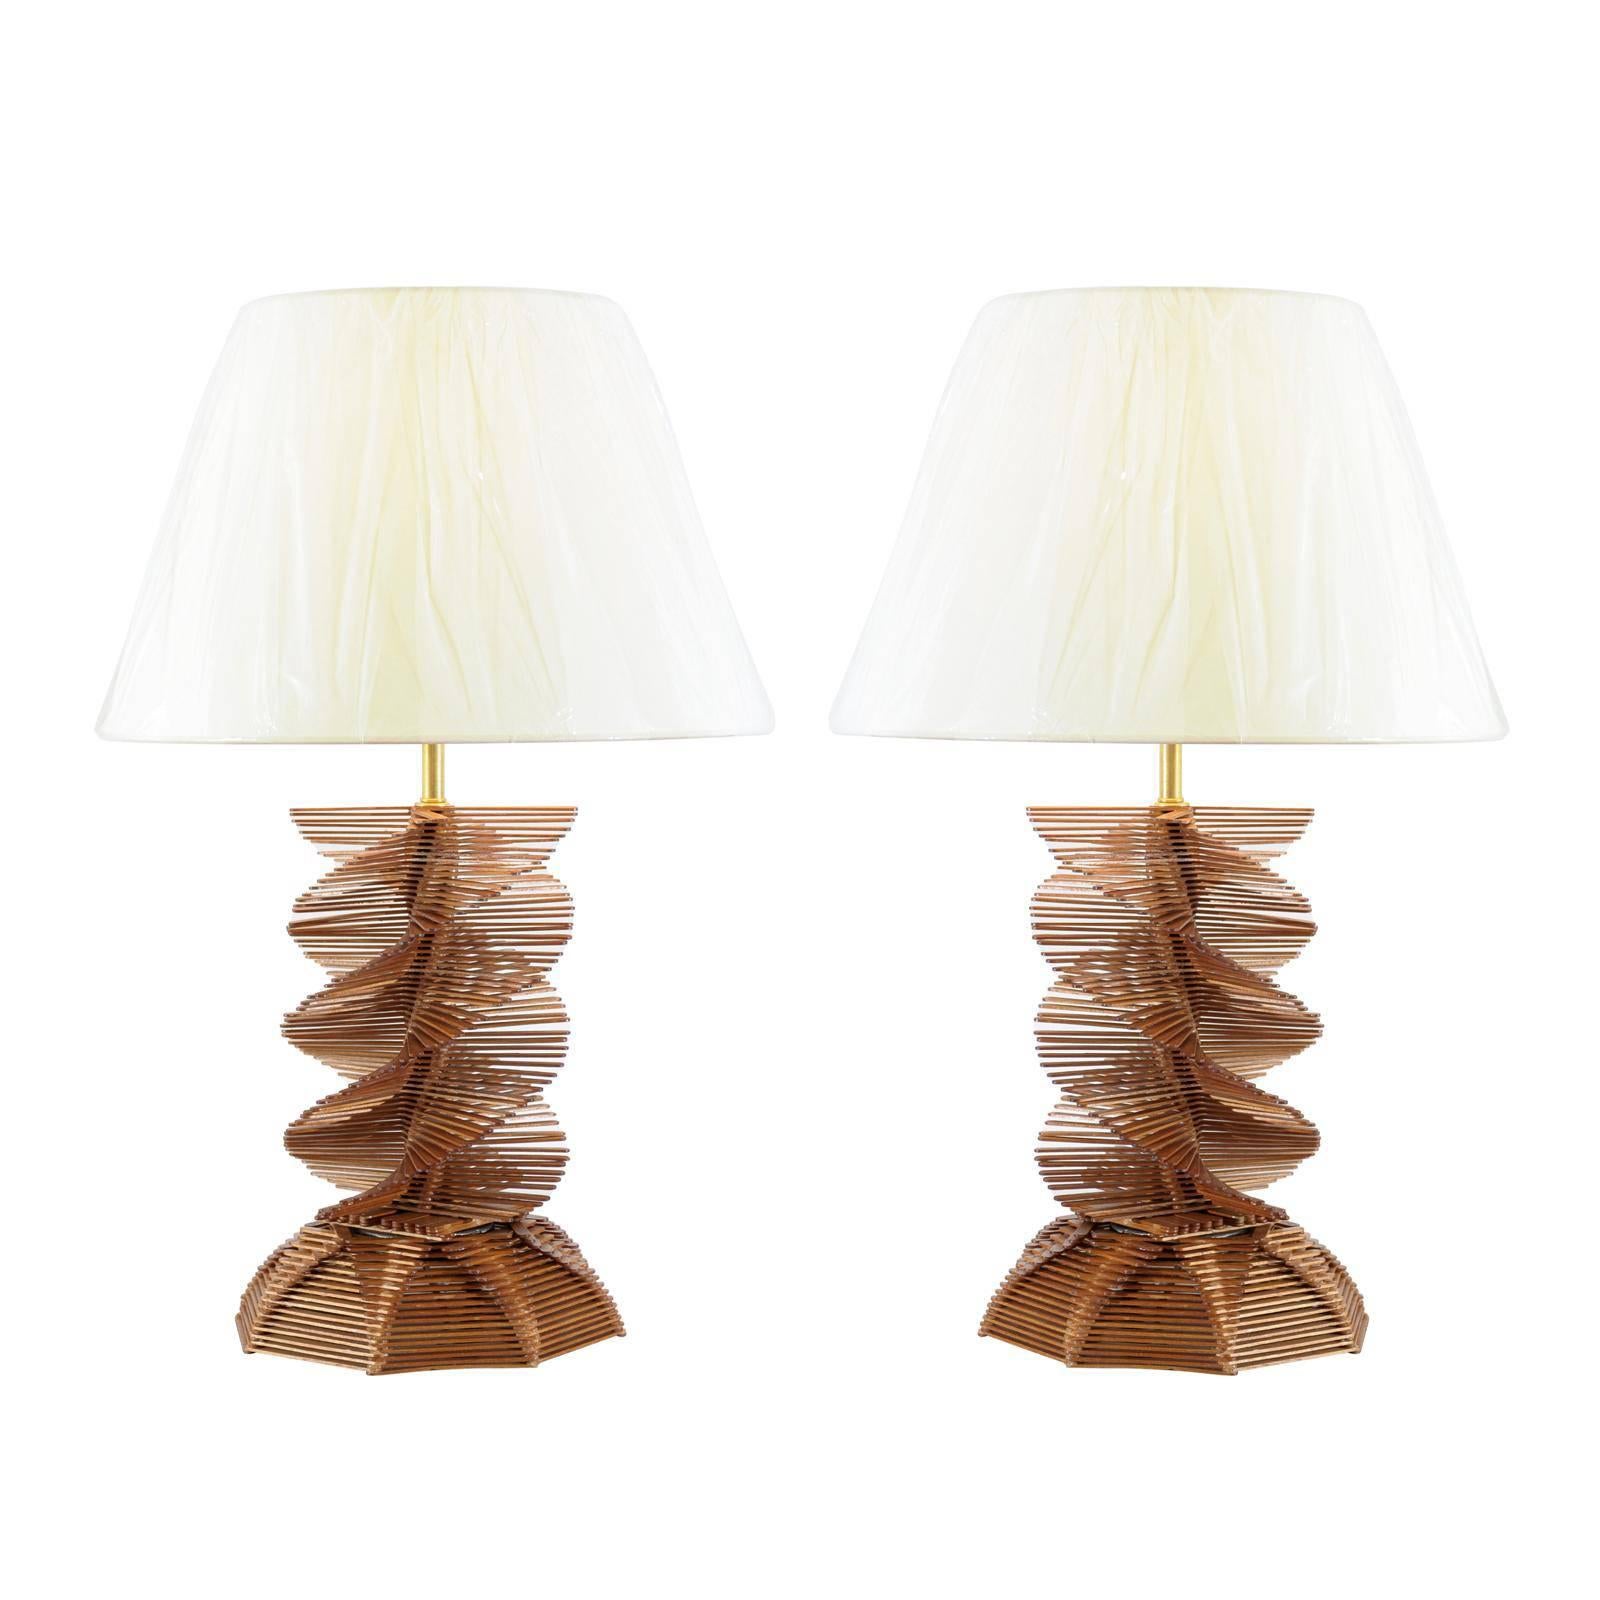 Fabulous Pair of Tramp Art Popsicle Stick Helix Lamps, circa 1970 For Sale